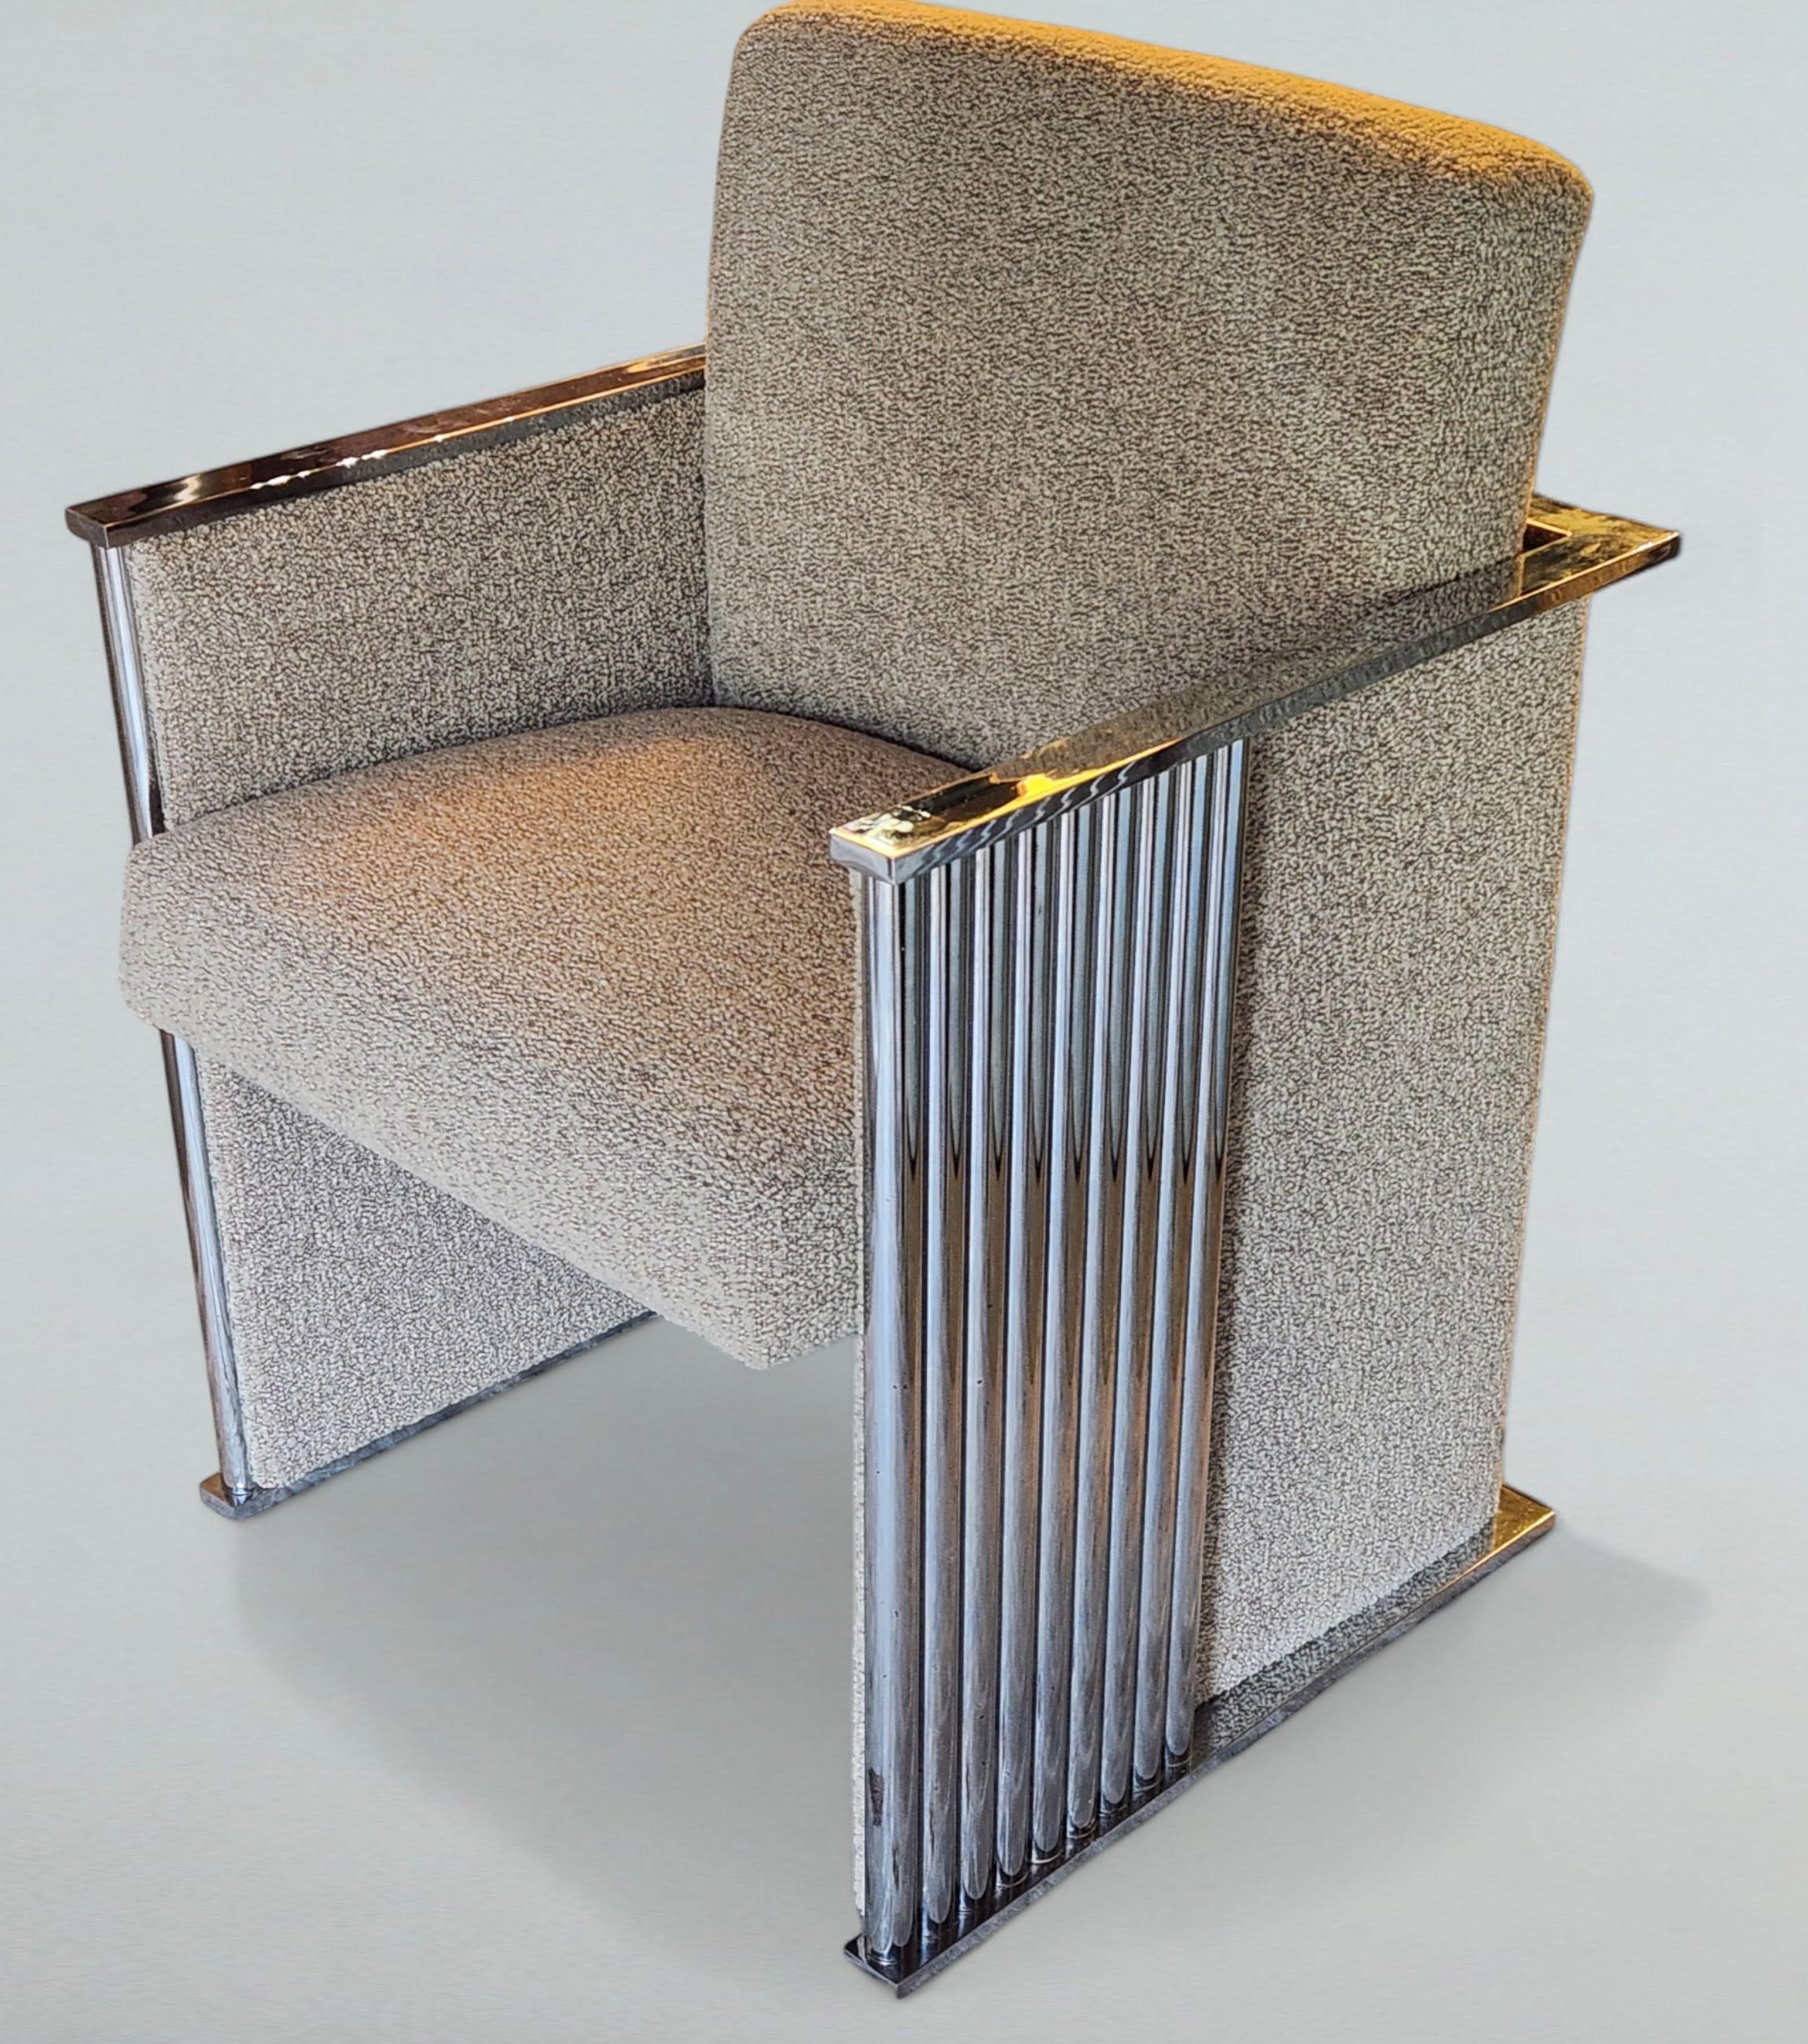 Hand-Crafted Milo Baughman Chrome Cube Lounge Chair Thayer Coggin 1980s For Sale